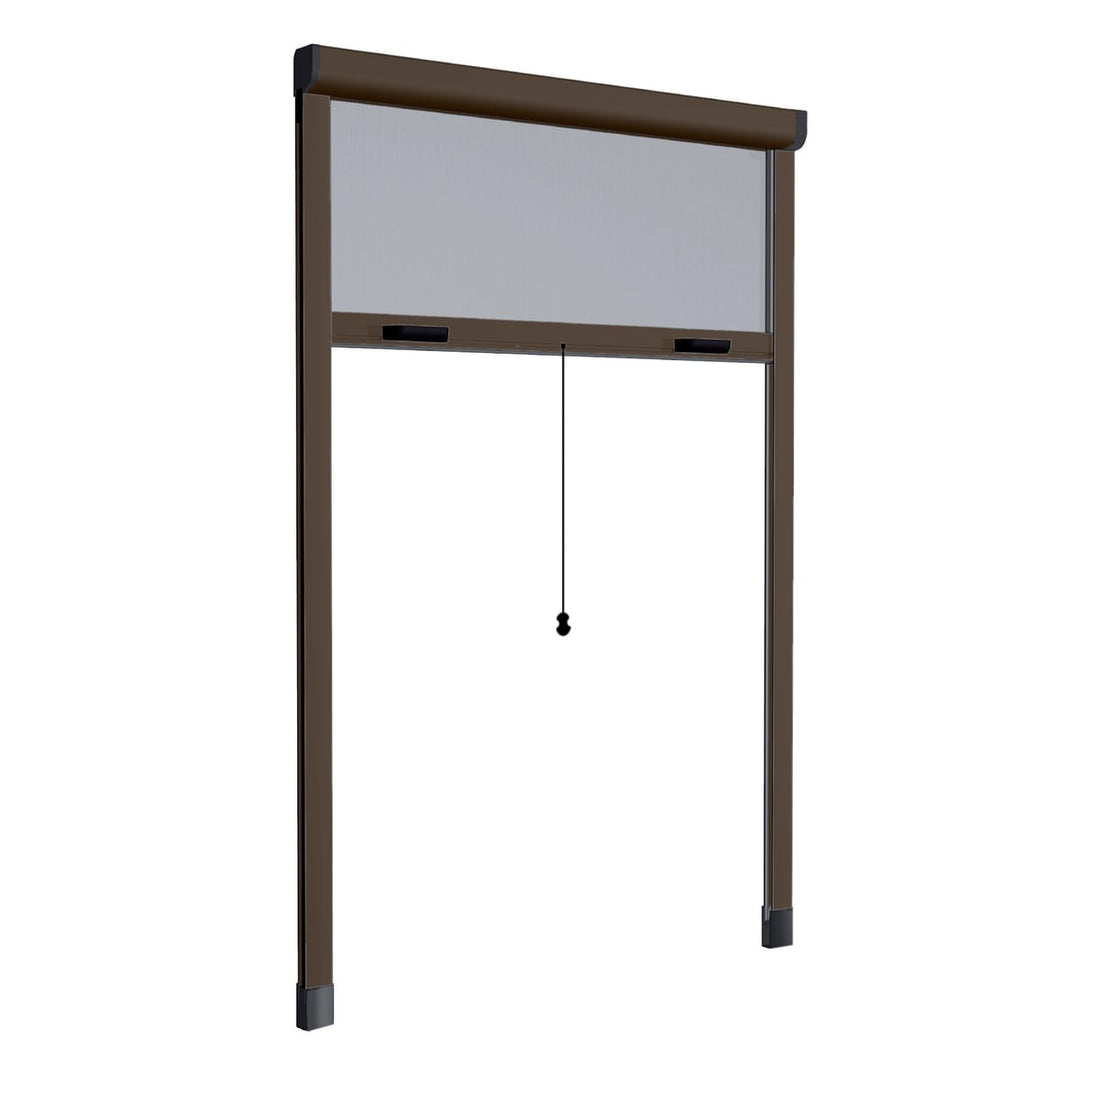 MOSQUITO SCREEN IN BROWN VERTICAL KIT WITH SCREWS+CLUTCH 160X170 CM